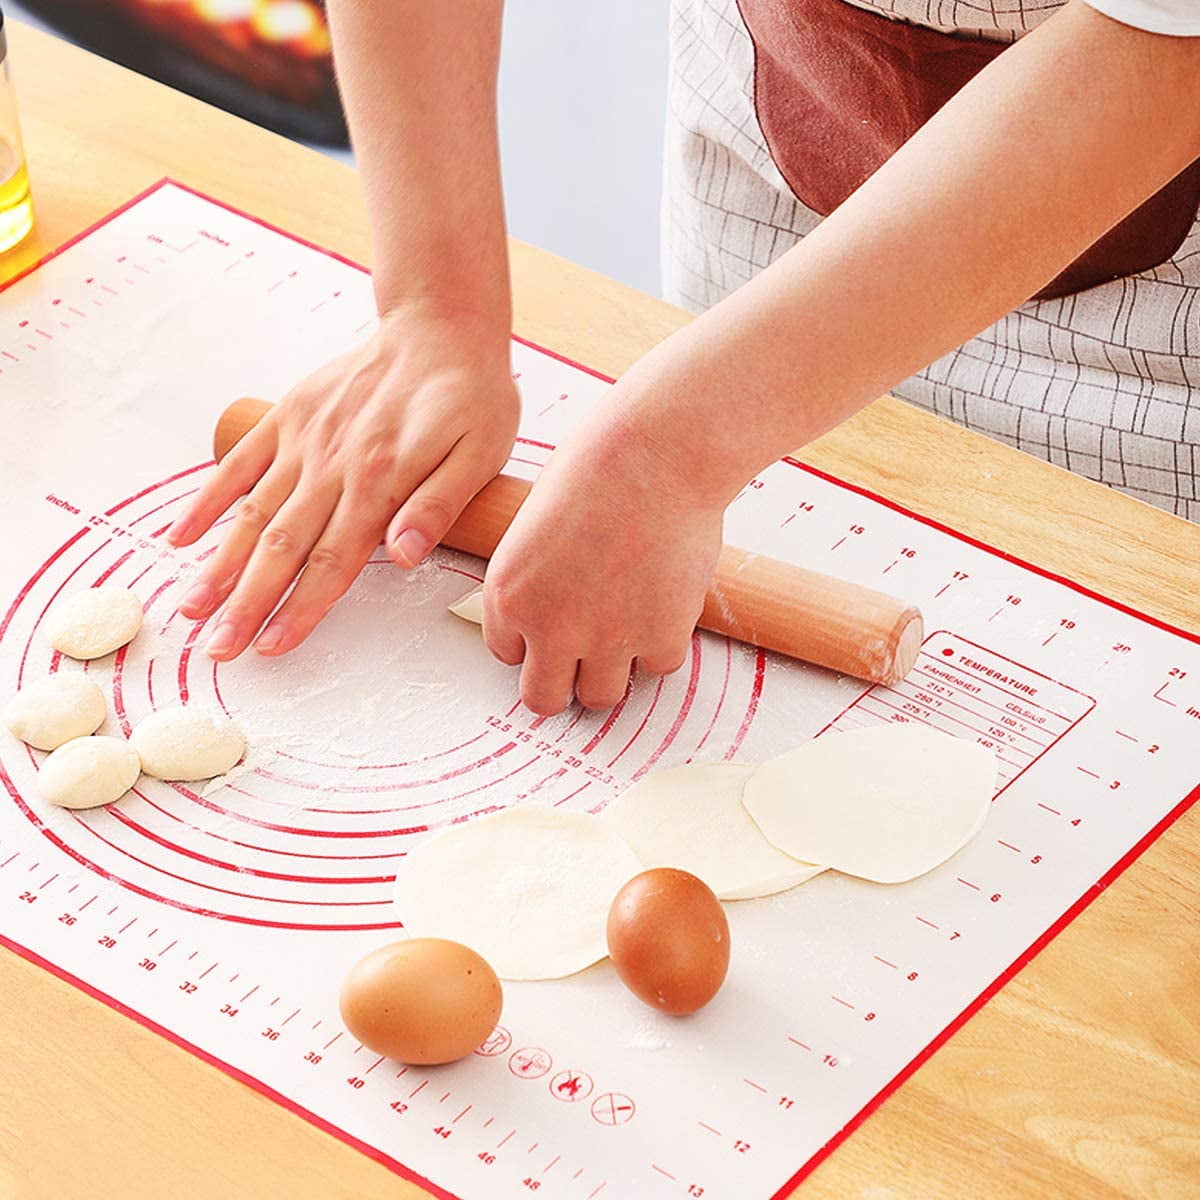 Non-Stick Silicone Baking Mat Extra Large Dough Rolling Pastry R9N7 white B Y8L1 